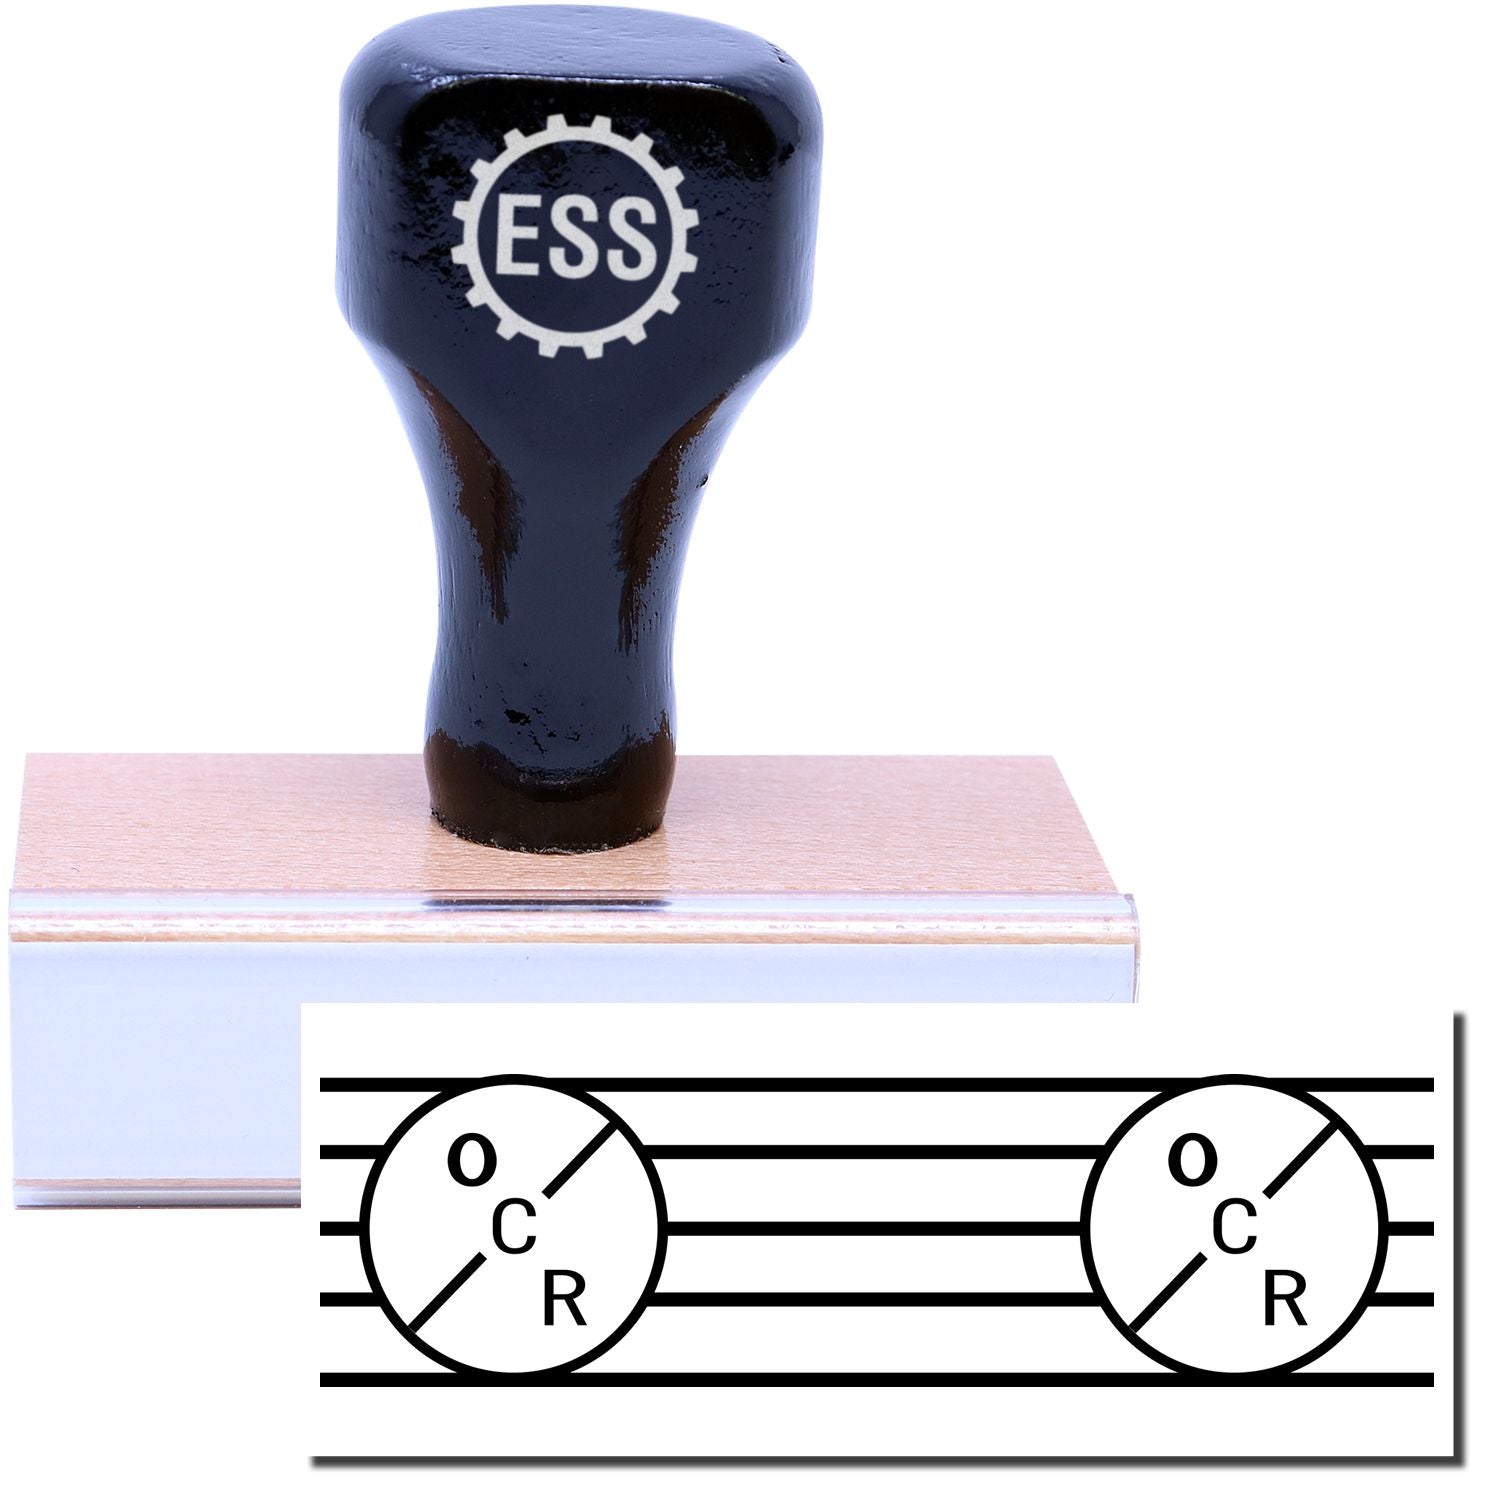 A stock office rubber stamp with a stamped image showing how the text "OCR" in a bold hue with extra design elements like lines and circles is displayed two times after stamping.